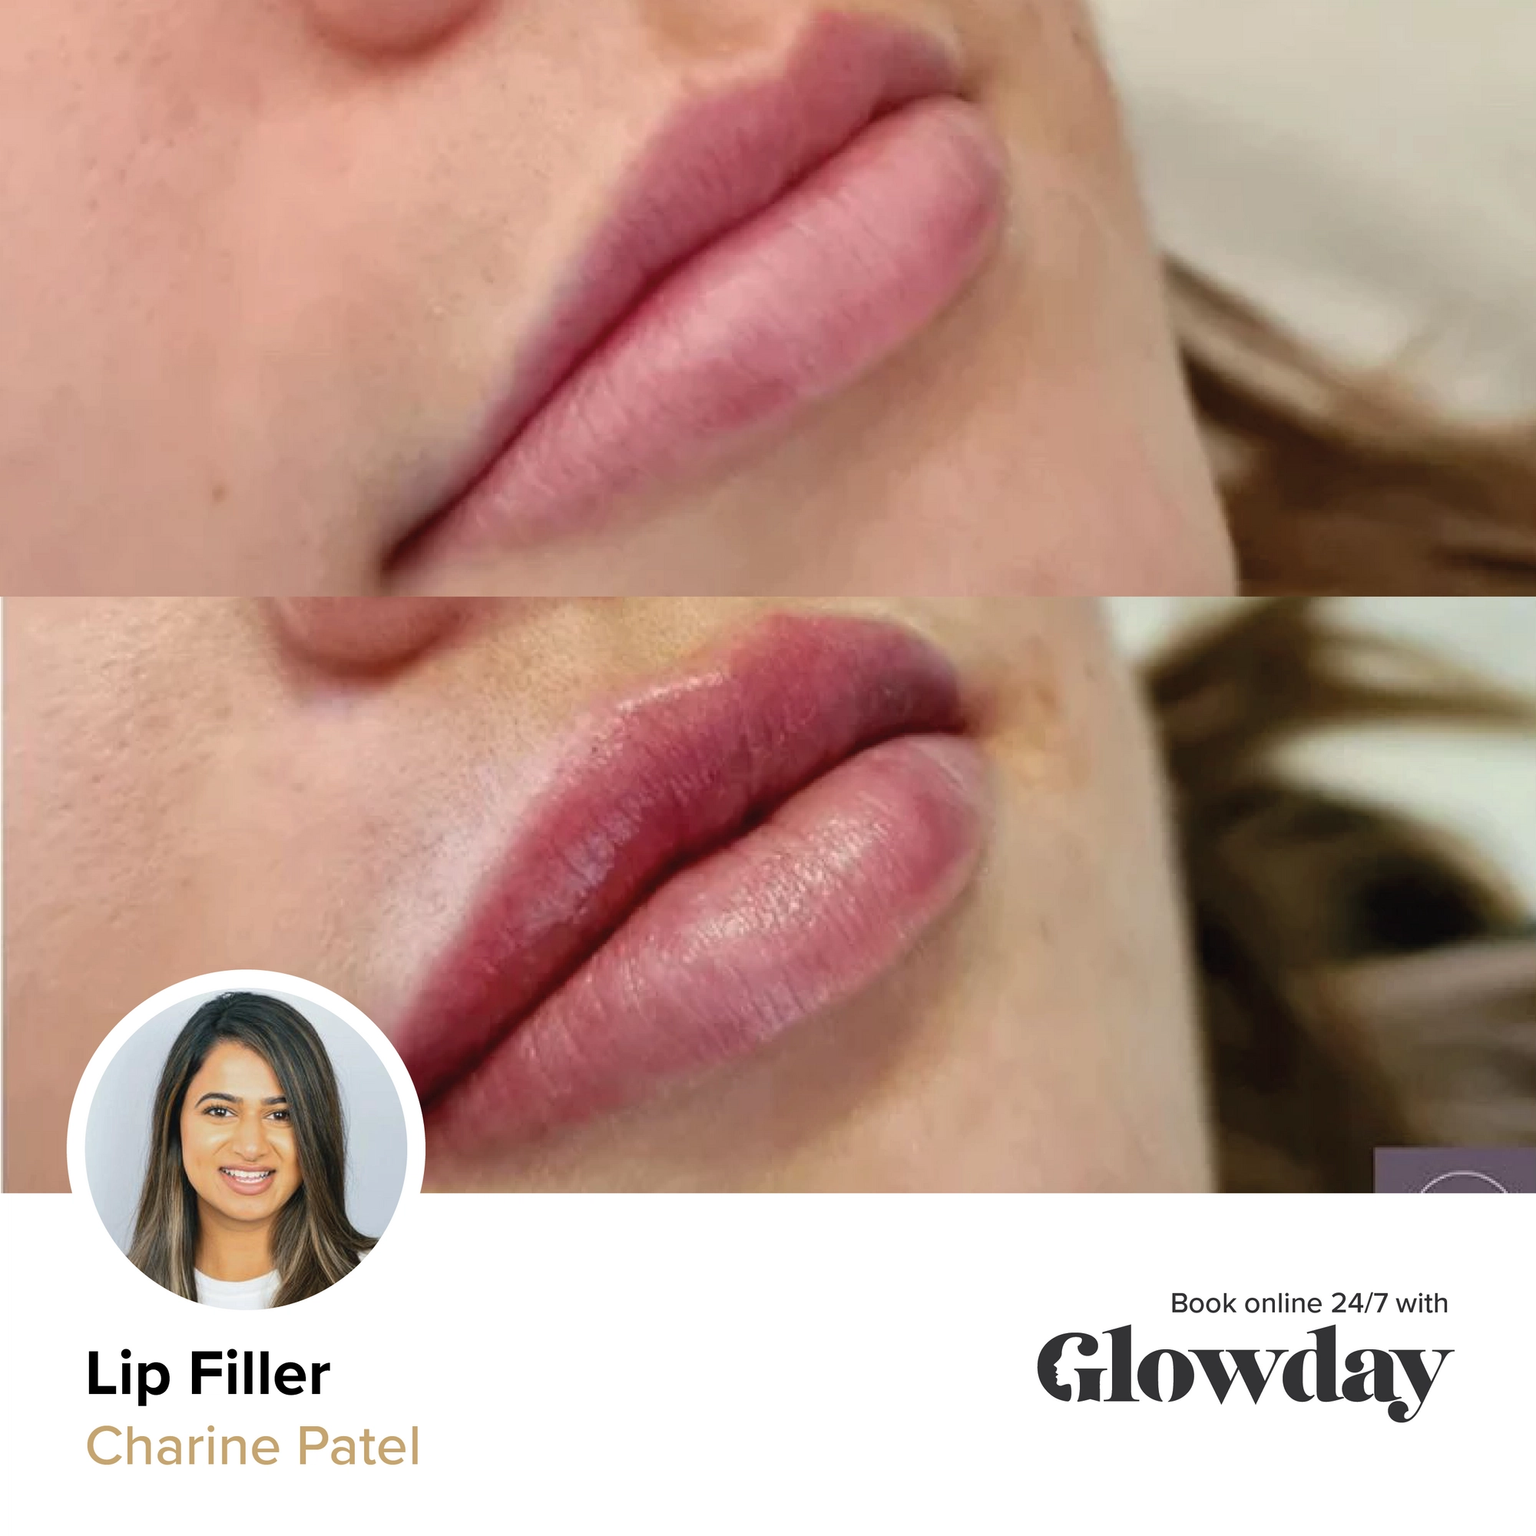 Lip filler before and after - Charine Patel